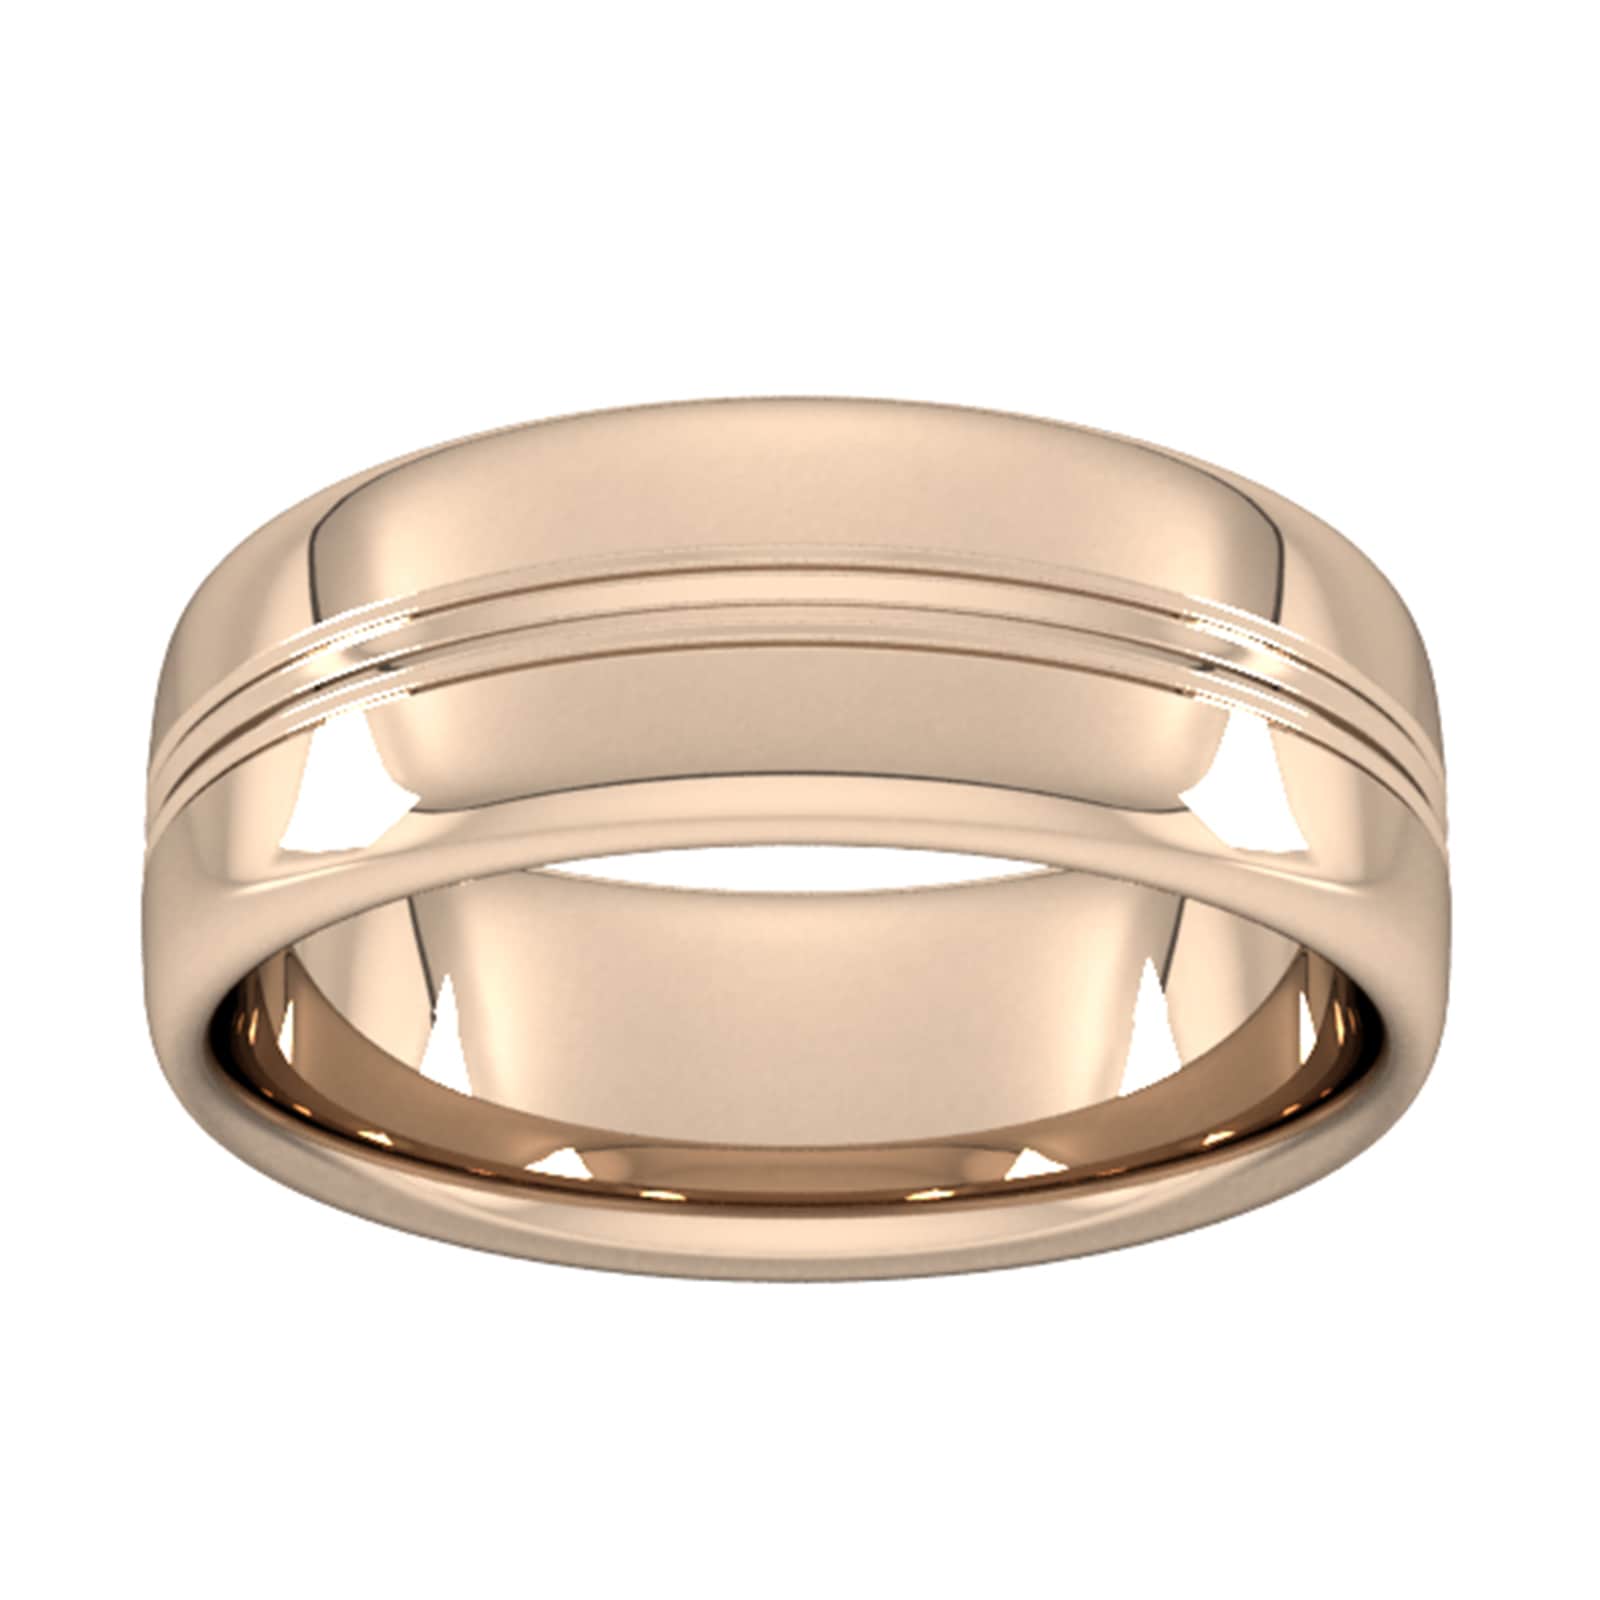 8mm Slight Court Extra Heavy Grooved Polished Finish Wedding Ring In 18 Carat Rose Gold - Ring Size M